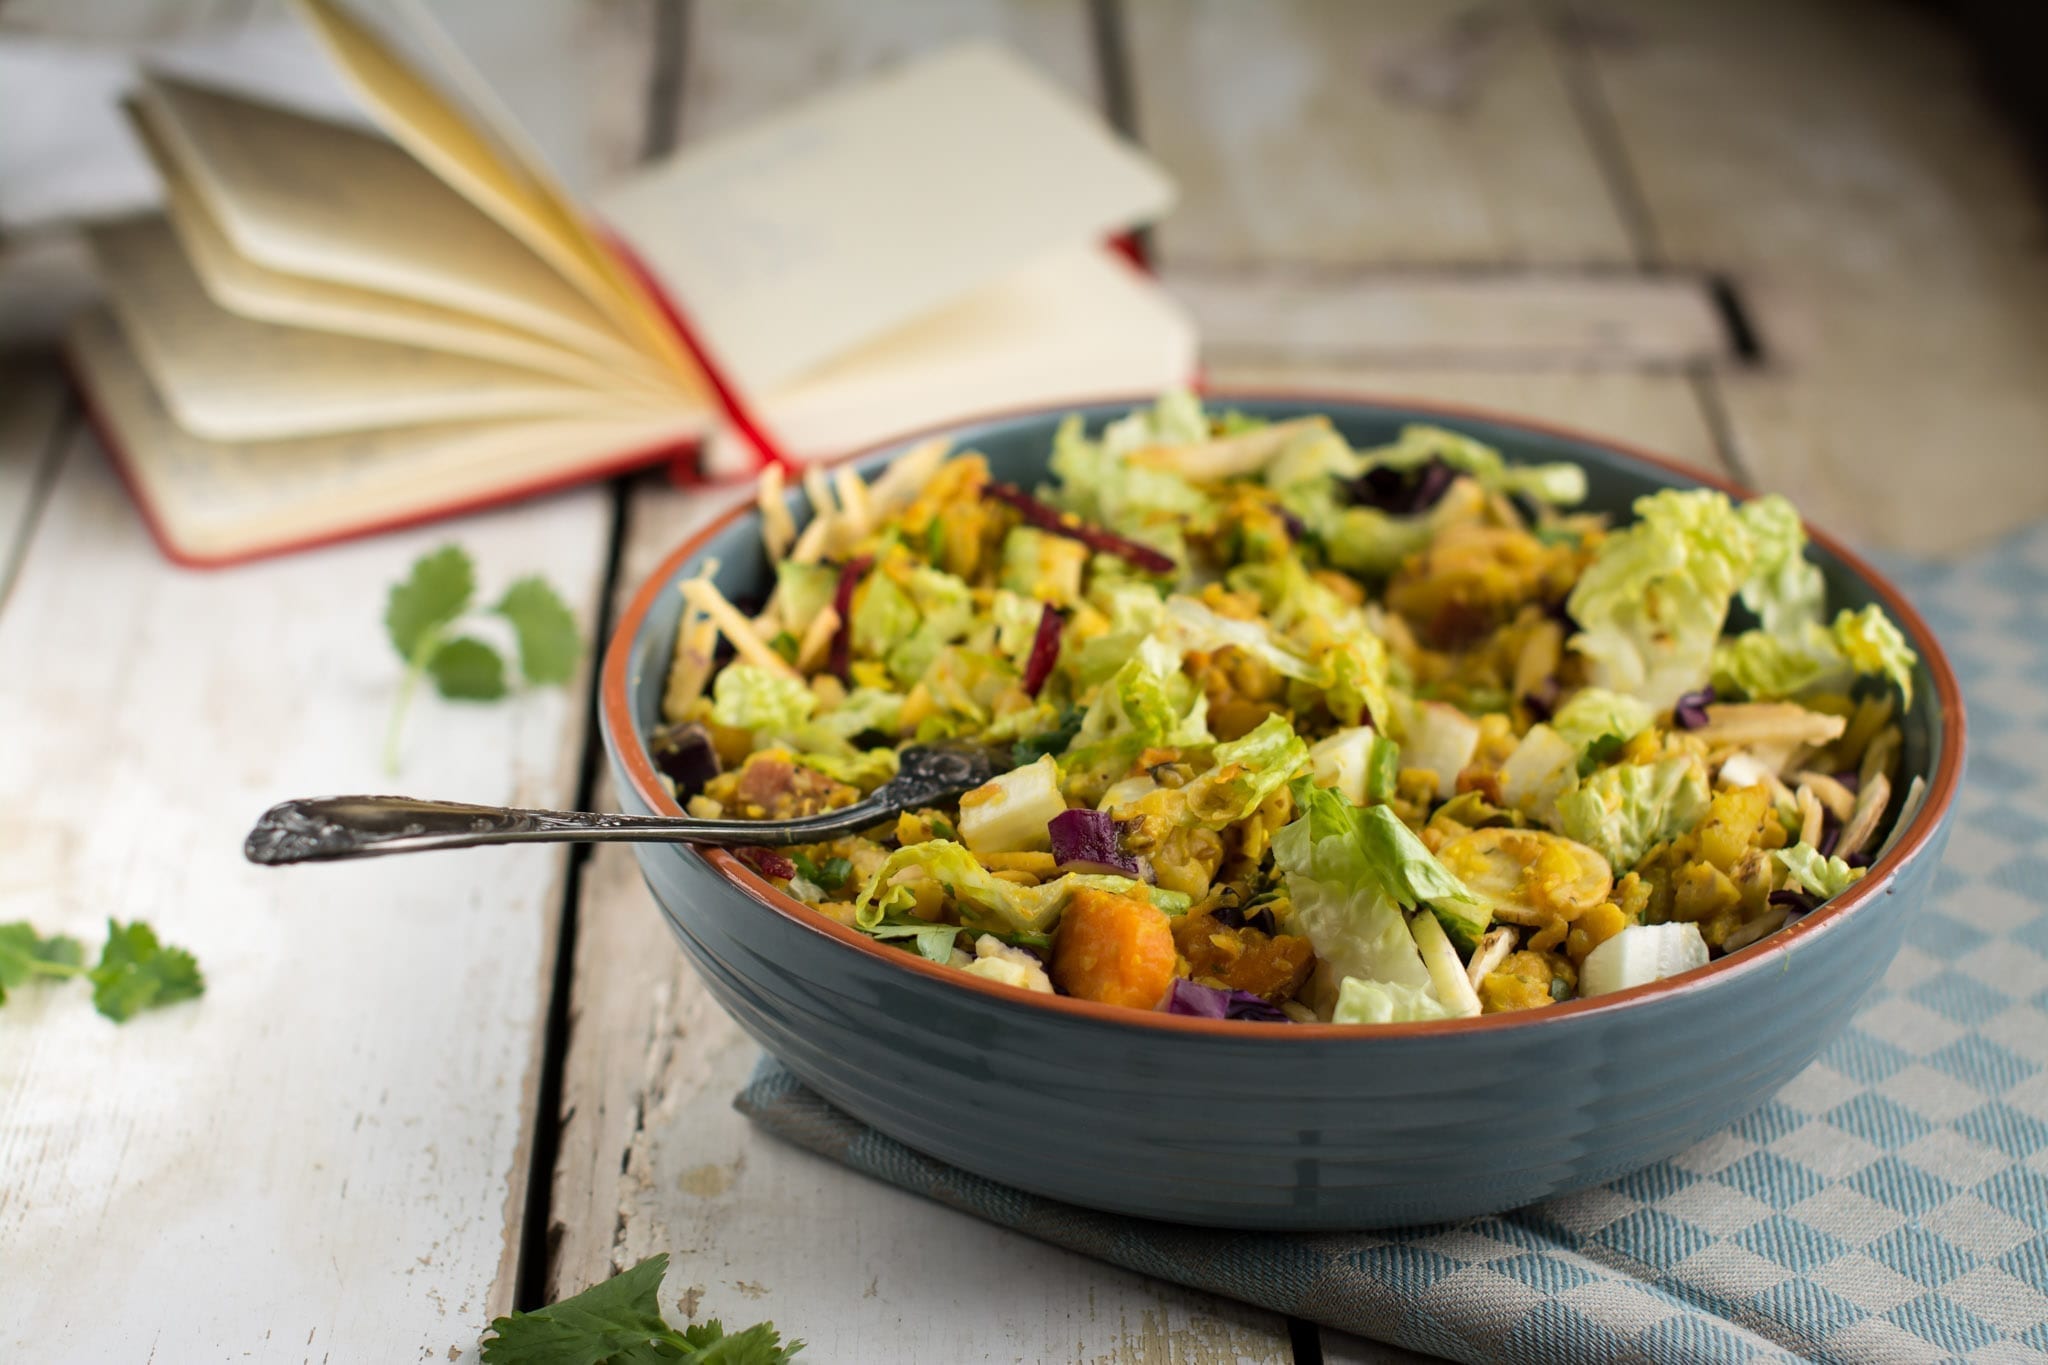 Salad with Chickpea Dhal, candida diet recipes